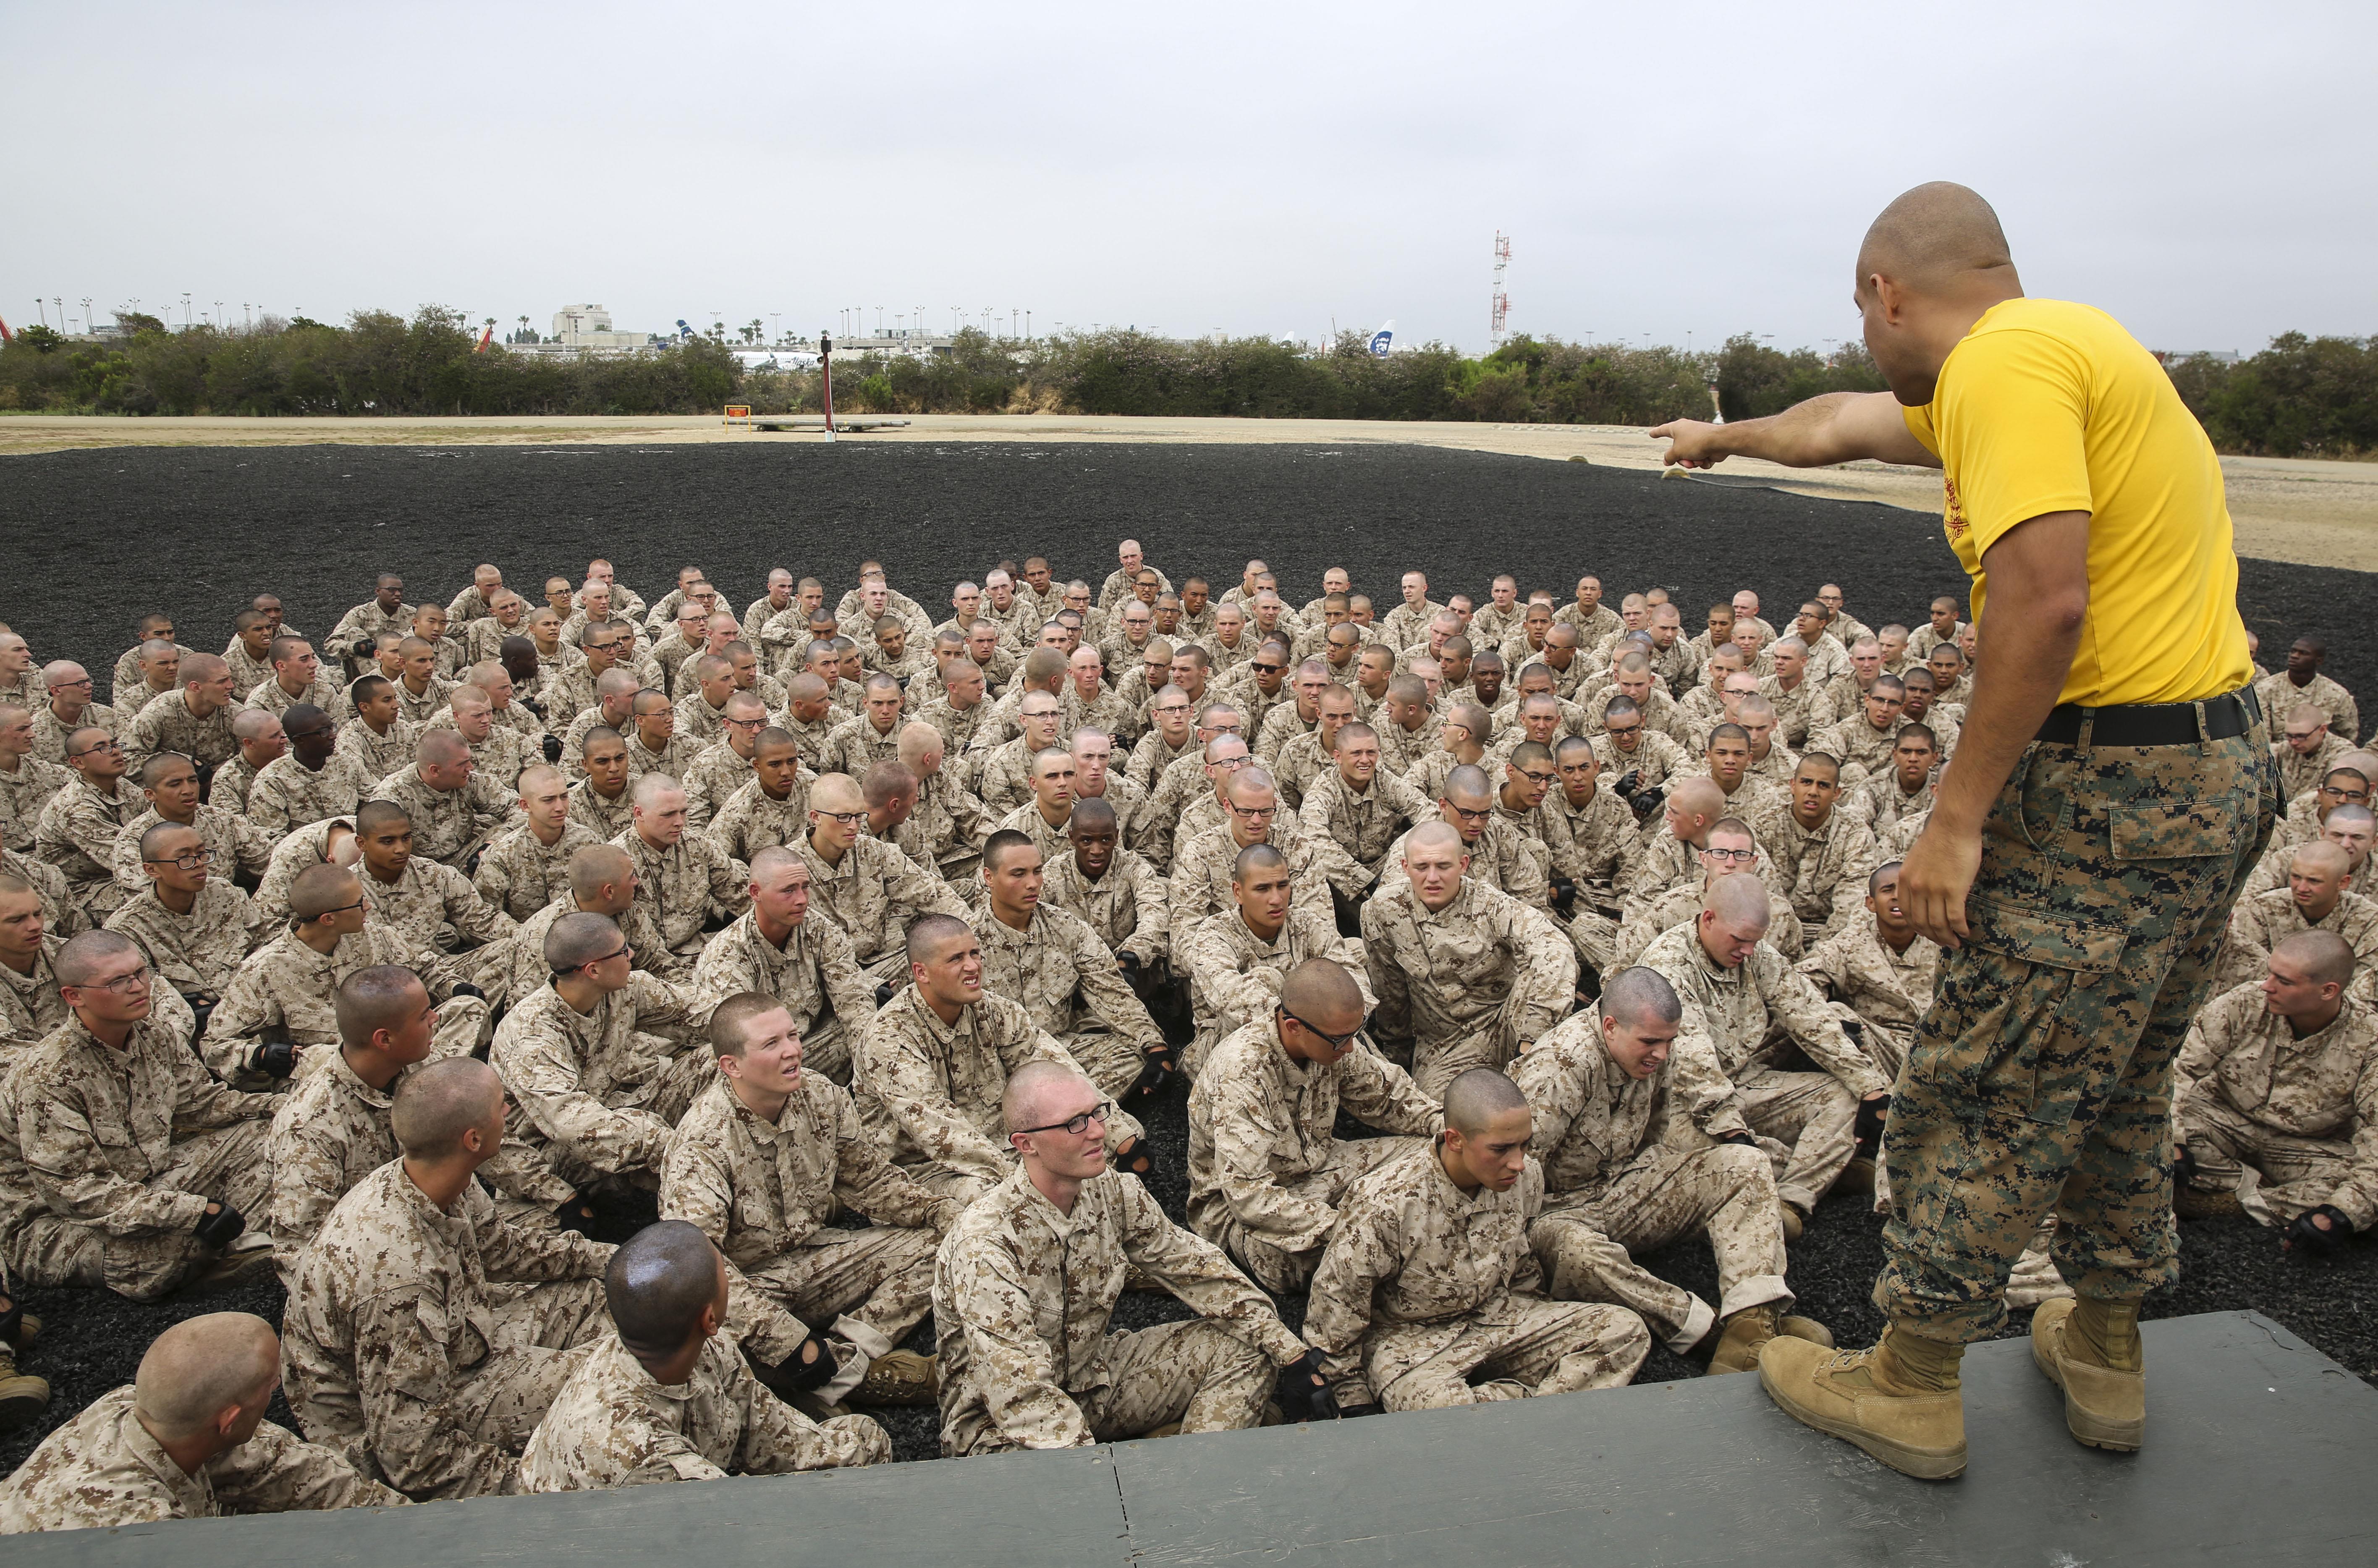 Recruits of Fox Company, 2nd Recruit Training Battalion, are briefed before a Marine Corps Martial Arts Program session at Marine Corps Recruit Depot San Diego, June 23. At the start of a MCMAP session, instructors demonstrate the techniques the recruits will execute. Annually, more than 17,000 males recruited from the Western Recruiting Region are trained at MCRD San Diego. Fox Company is scheduled to graduate Sept. 8.